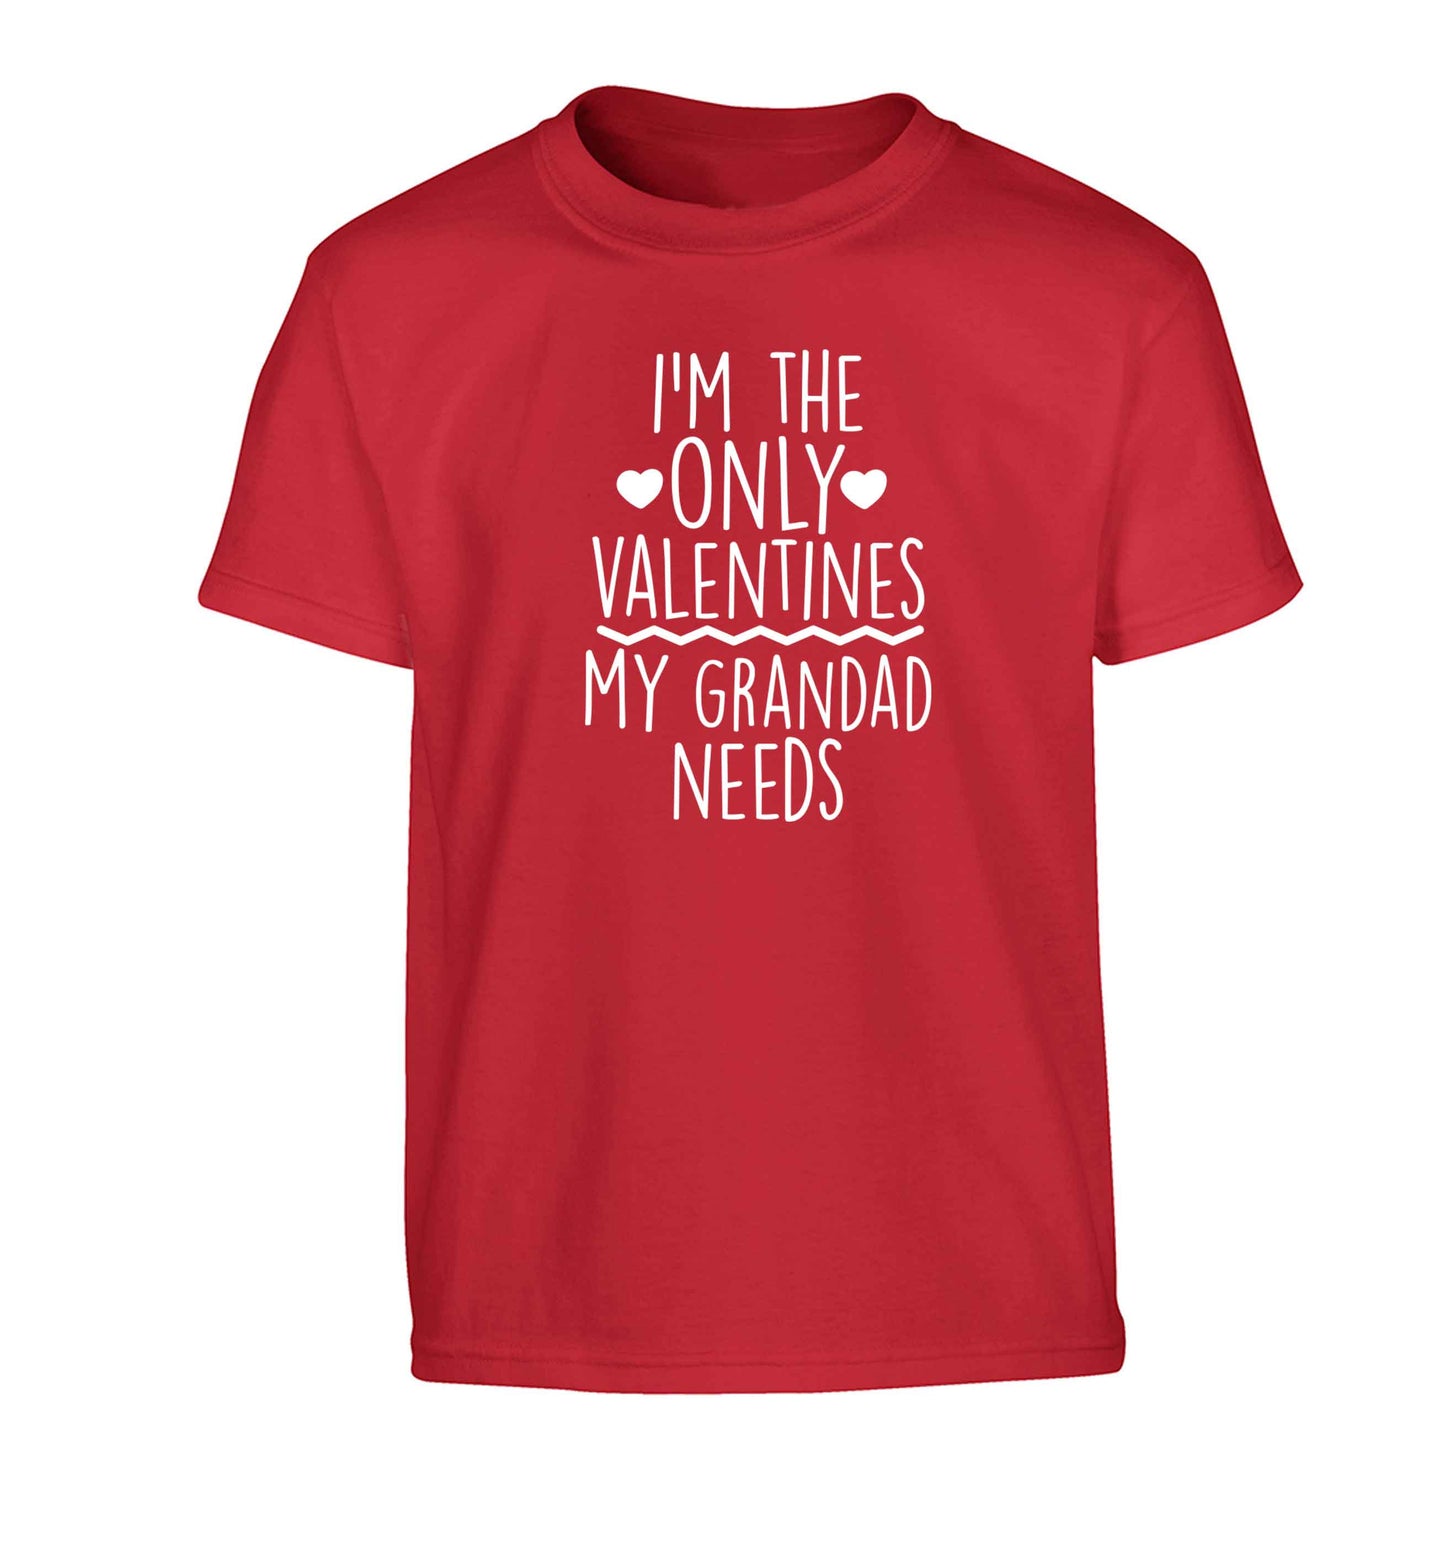 I'm the only valentines my grandad needs Children's red Tshirt 12-13 Years